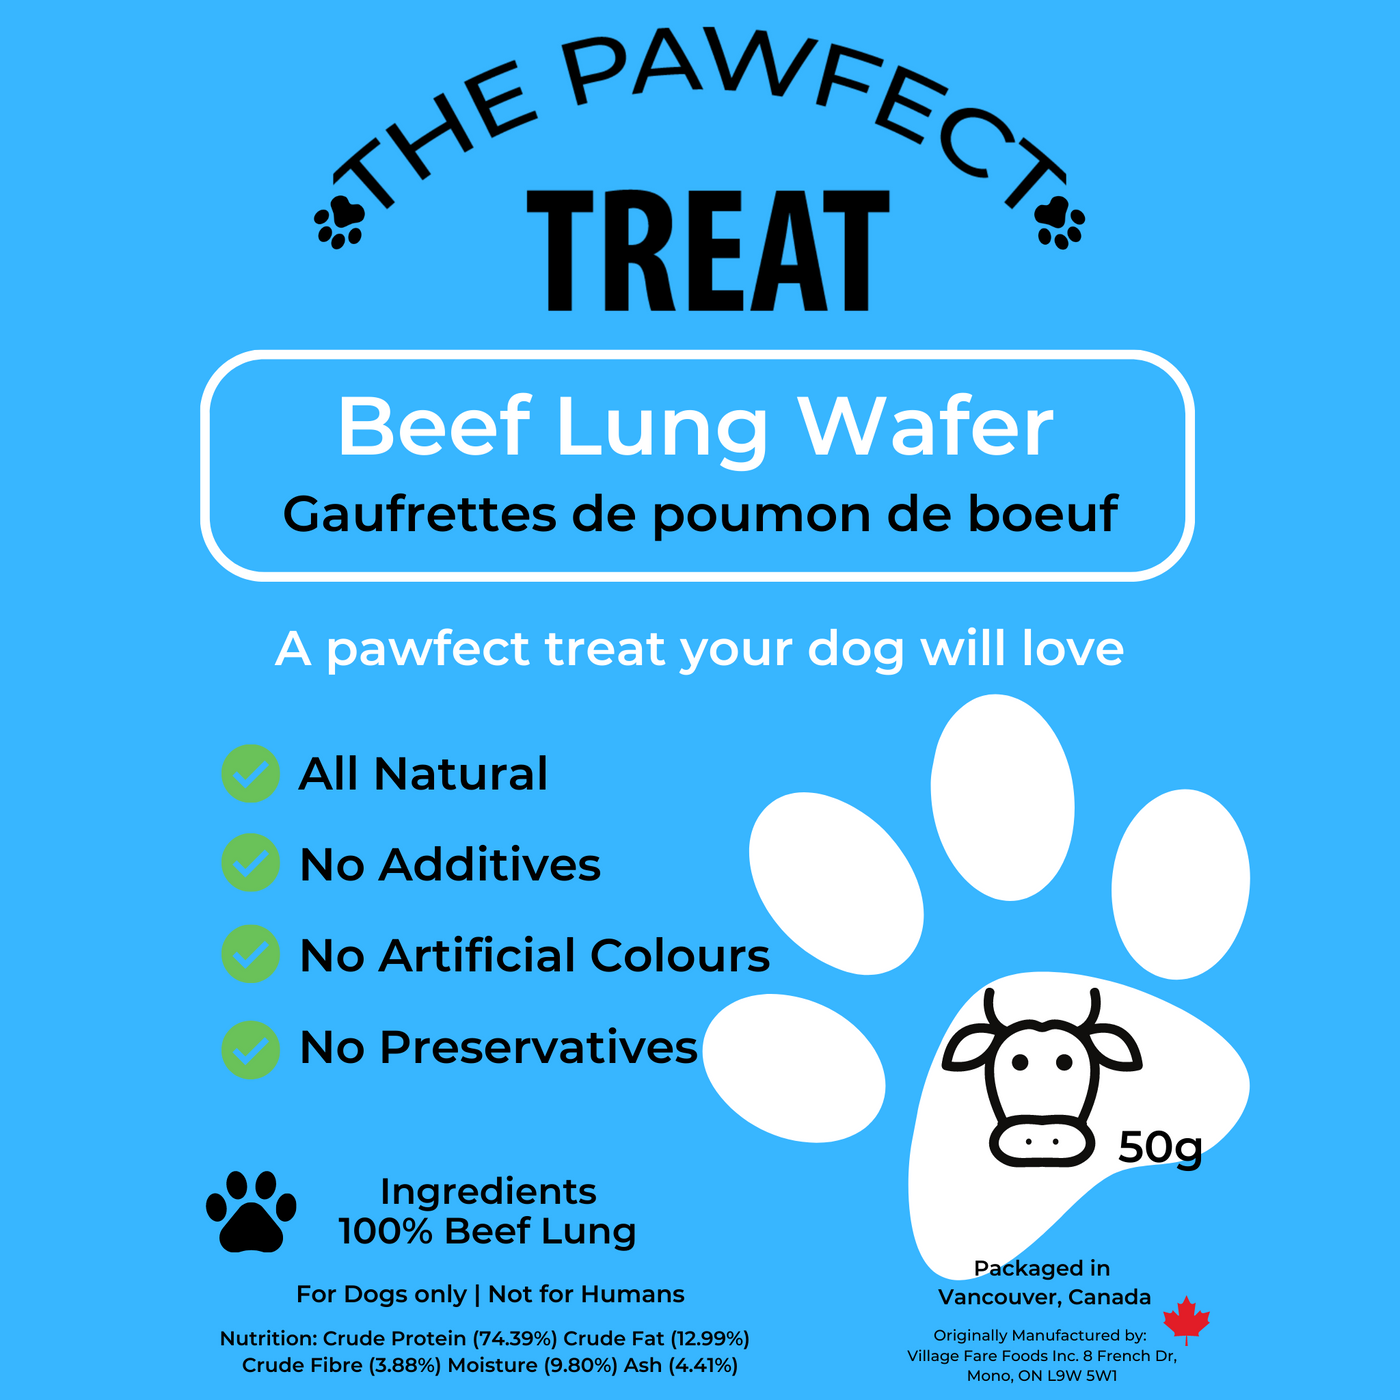 Beef Lung Wafer (50g)